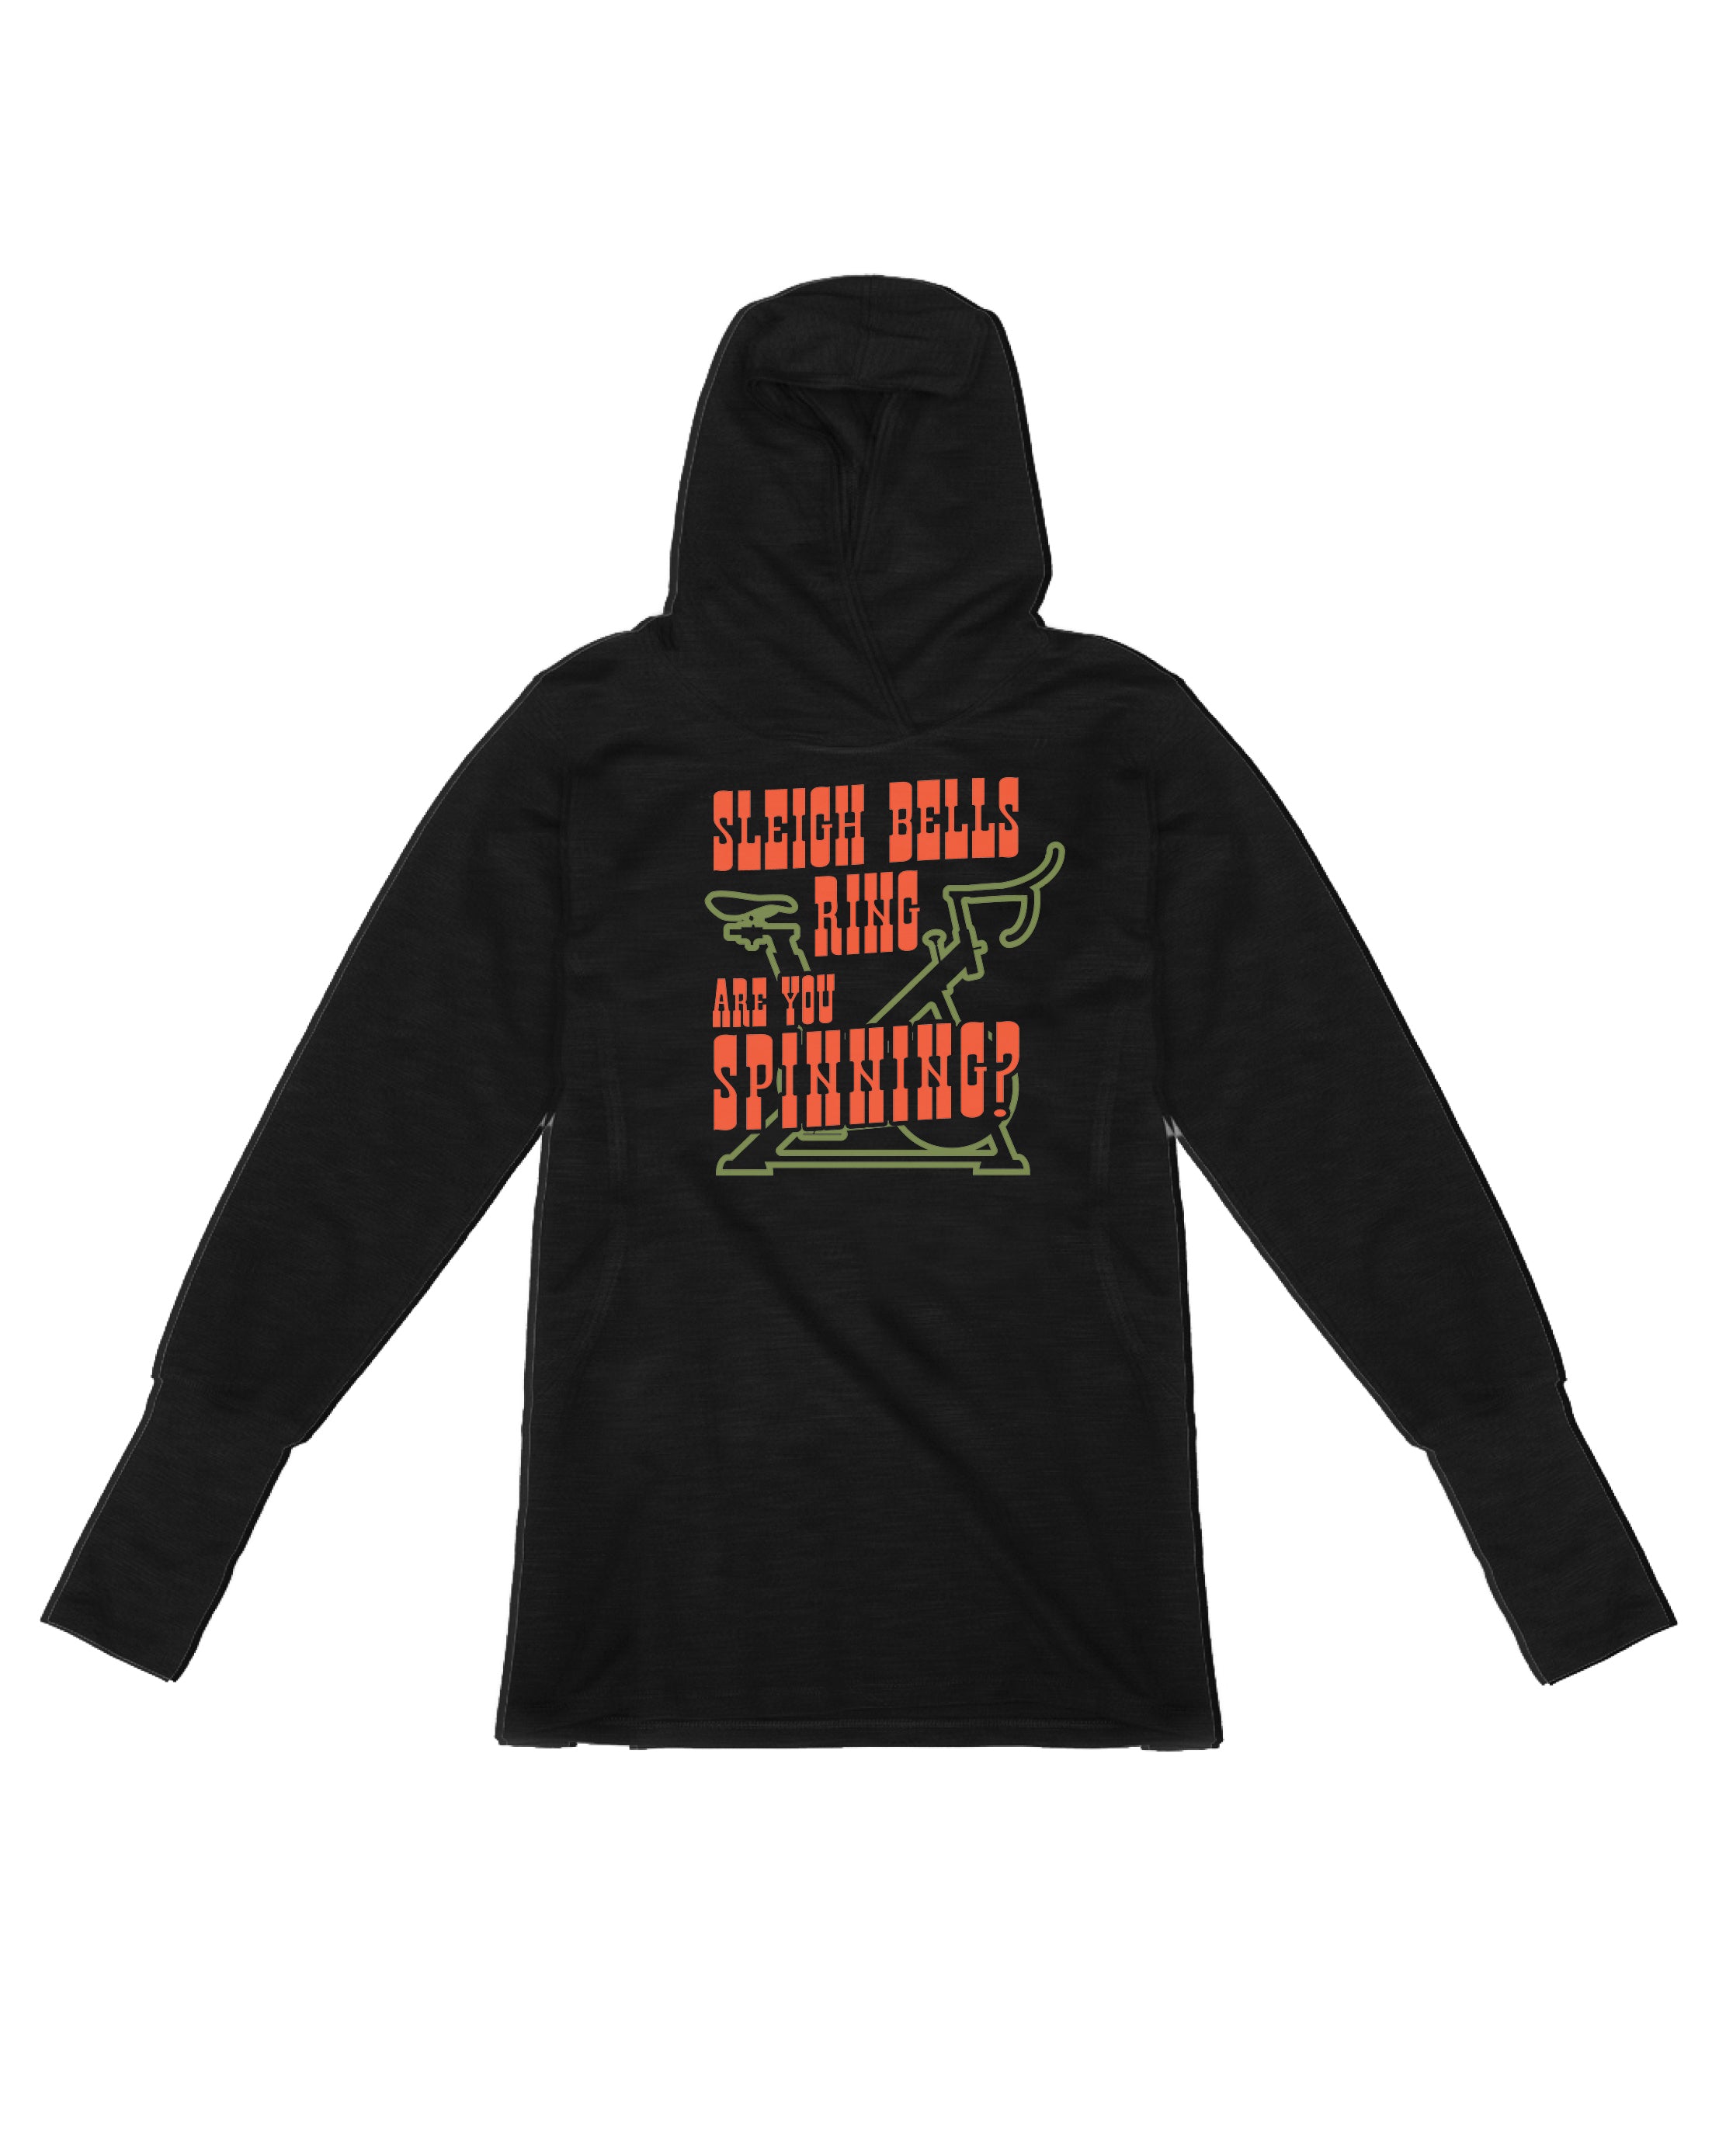 I Know When Those Sleigh Bells Ring Adult Crewneck – Bewild